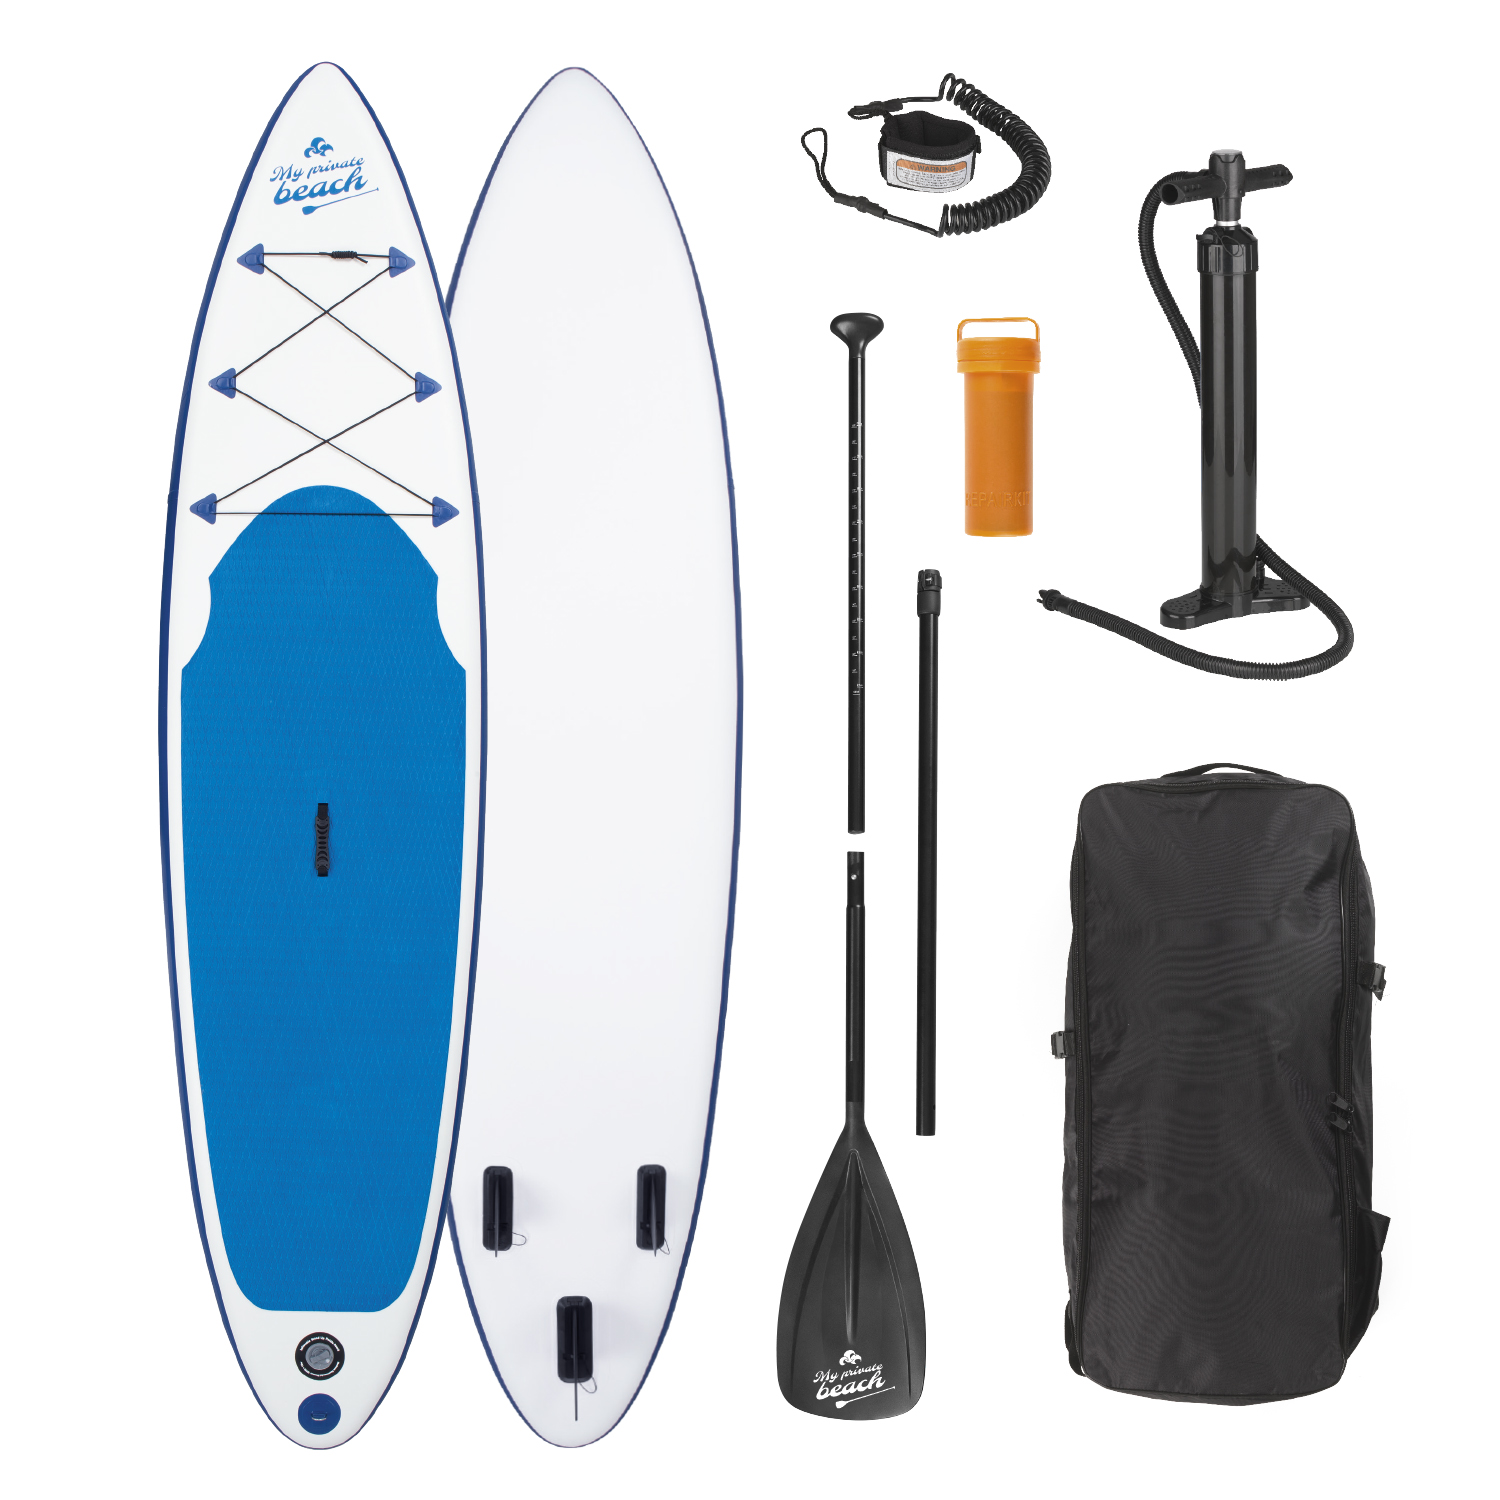 EASYMAXX Paddle-Board, mehrfarbig Stand-Up 06900